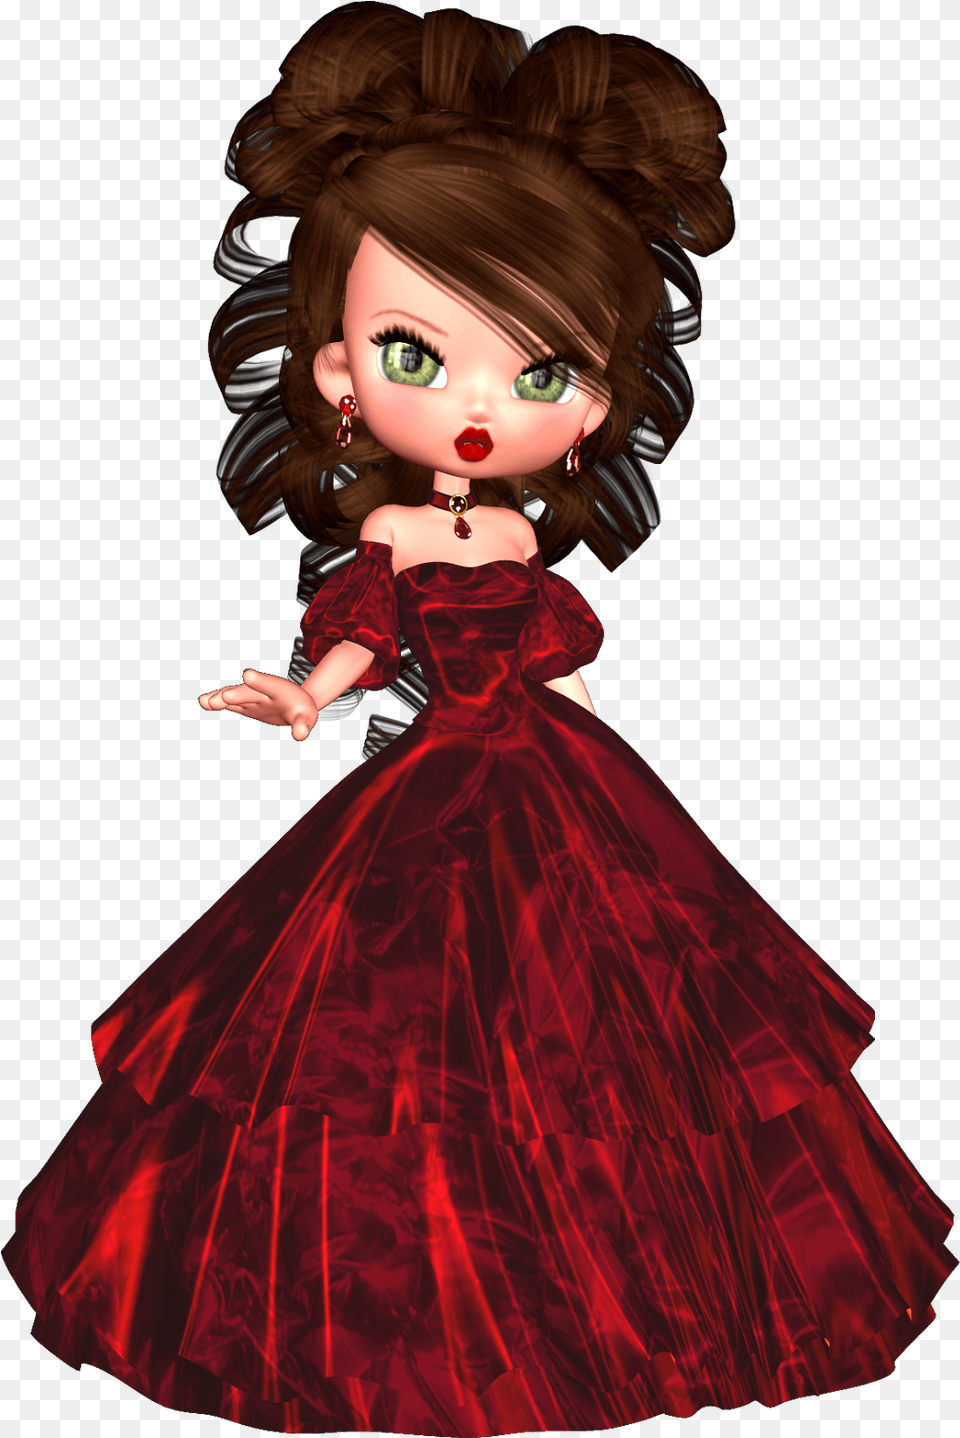 Explore Beautiful Dolls Baby Dolls And More Doll, Clothing, Gown, Formal Wear, Fashion Free Transparent Png